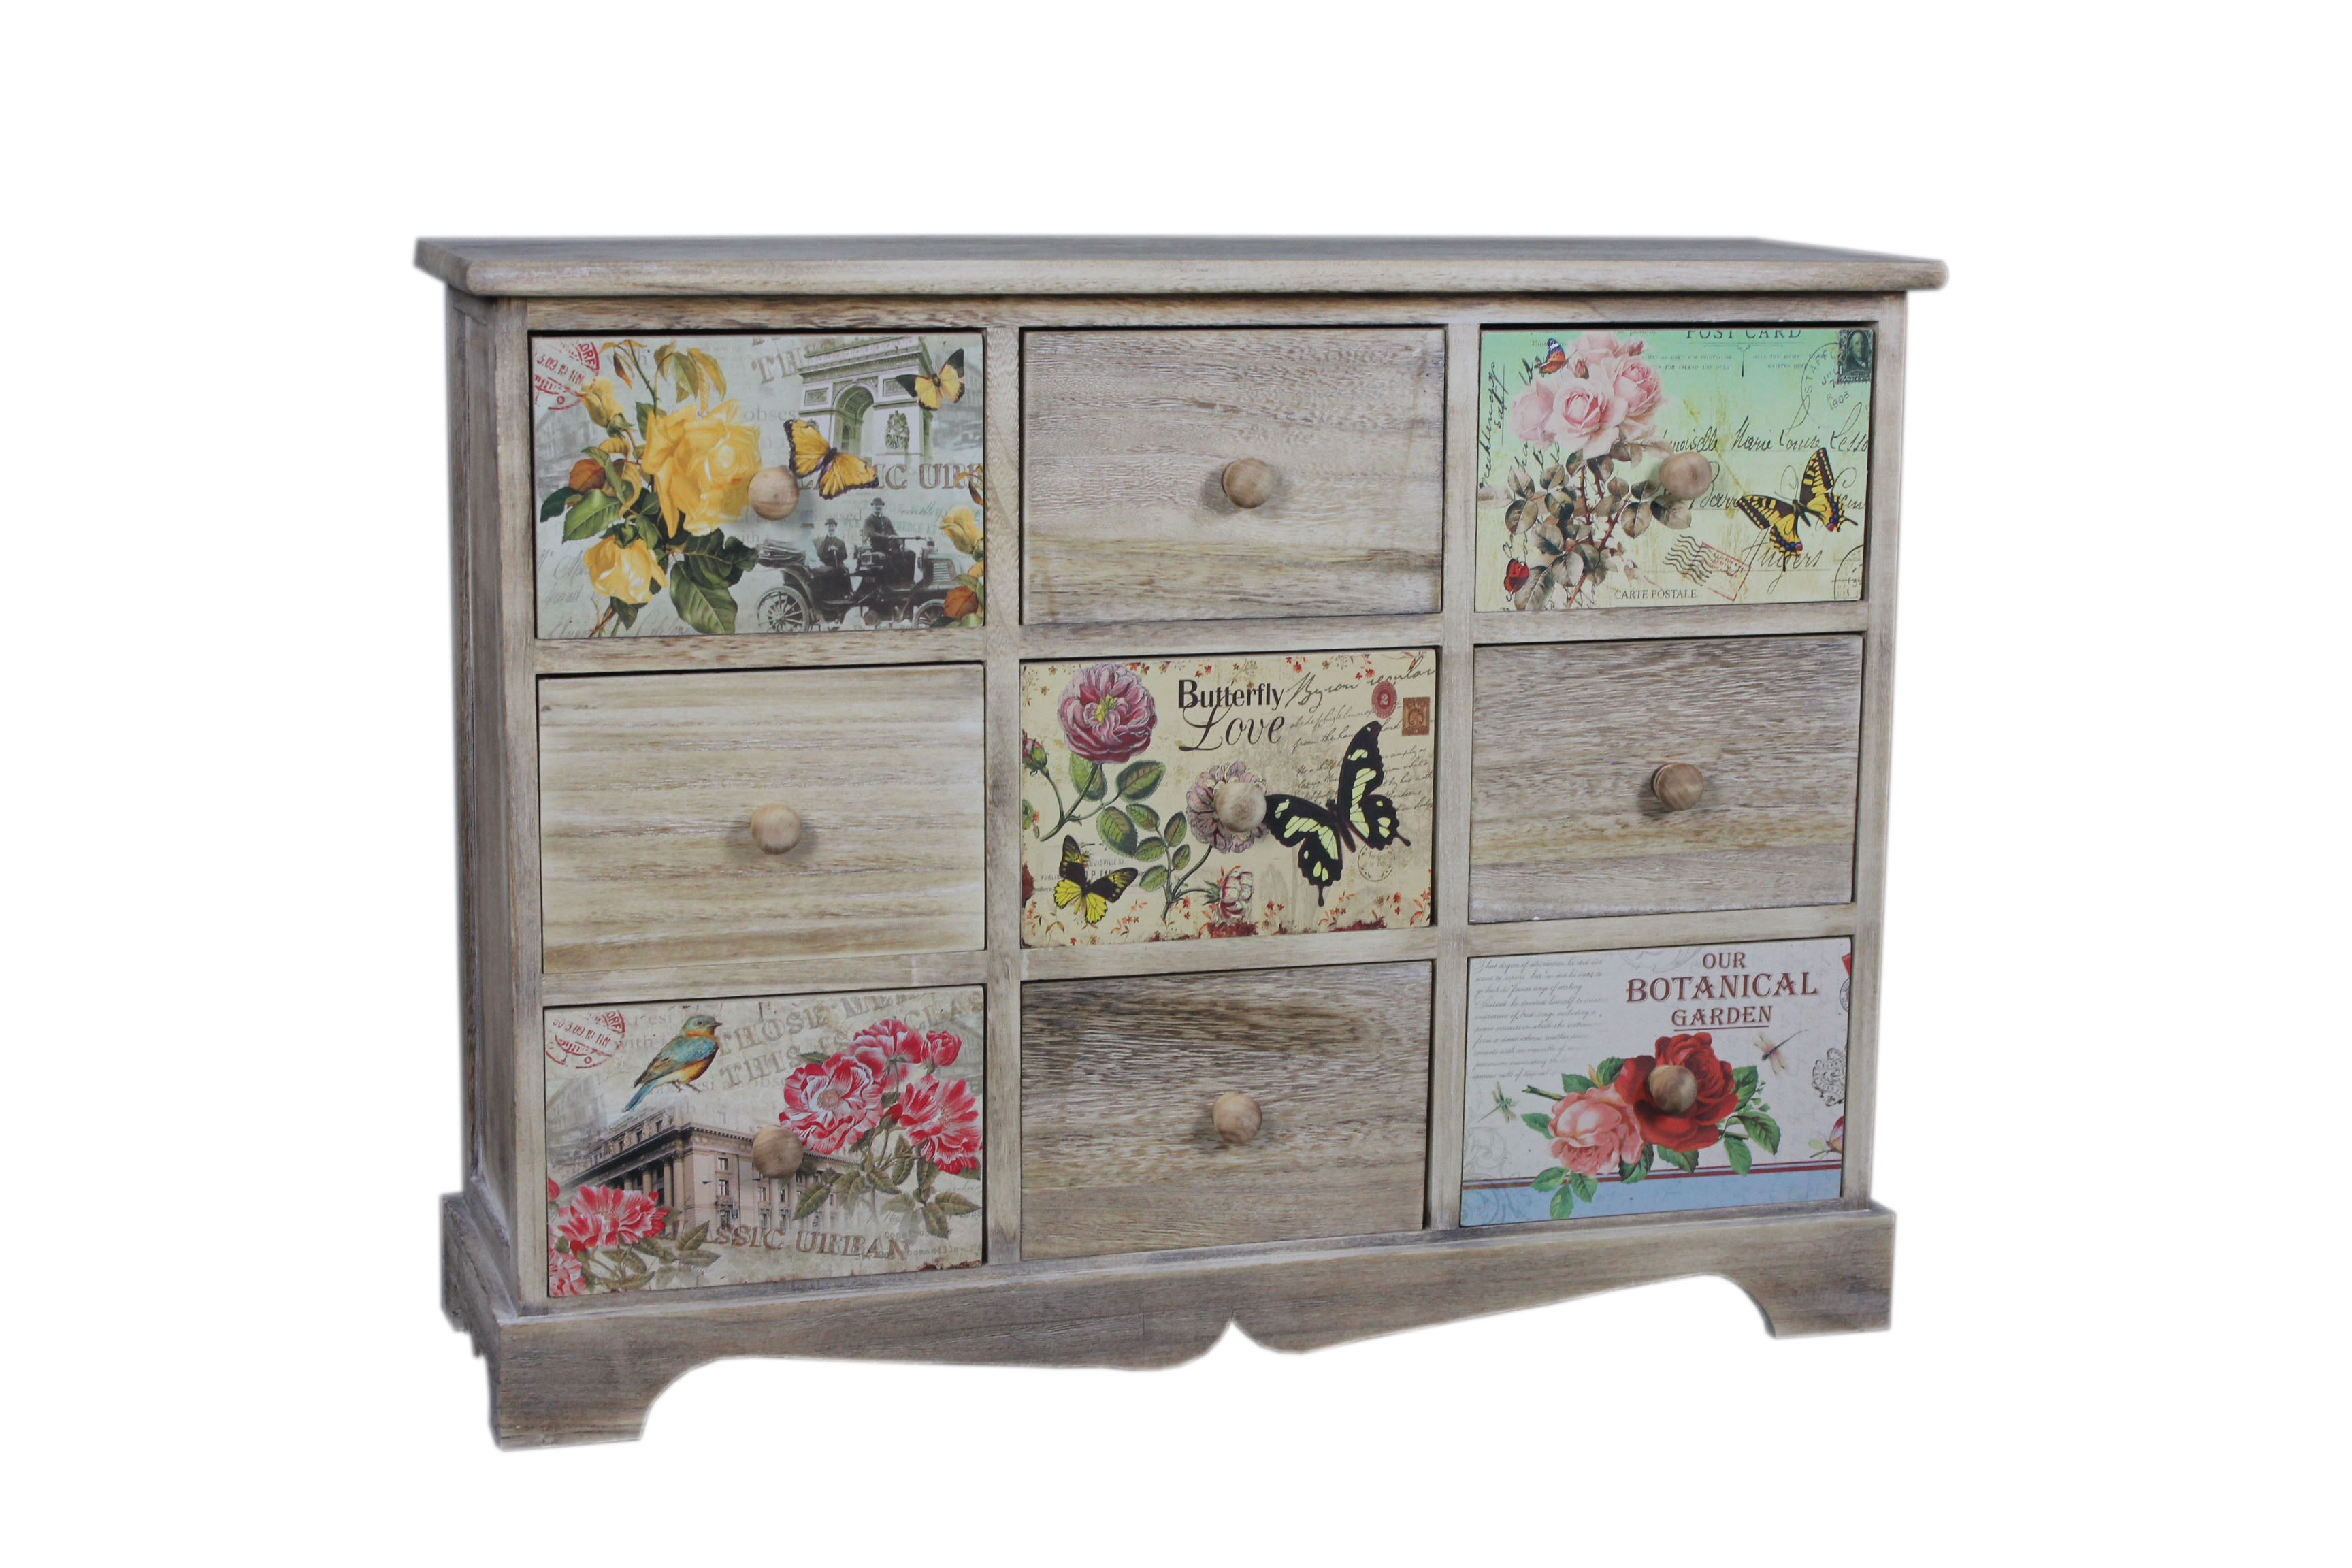 Nine drawers cabinet,chest-4116